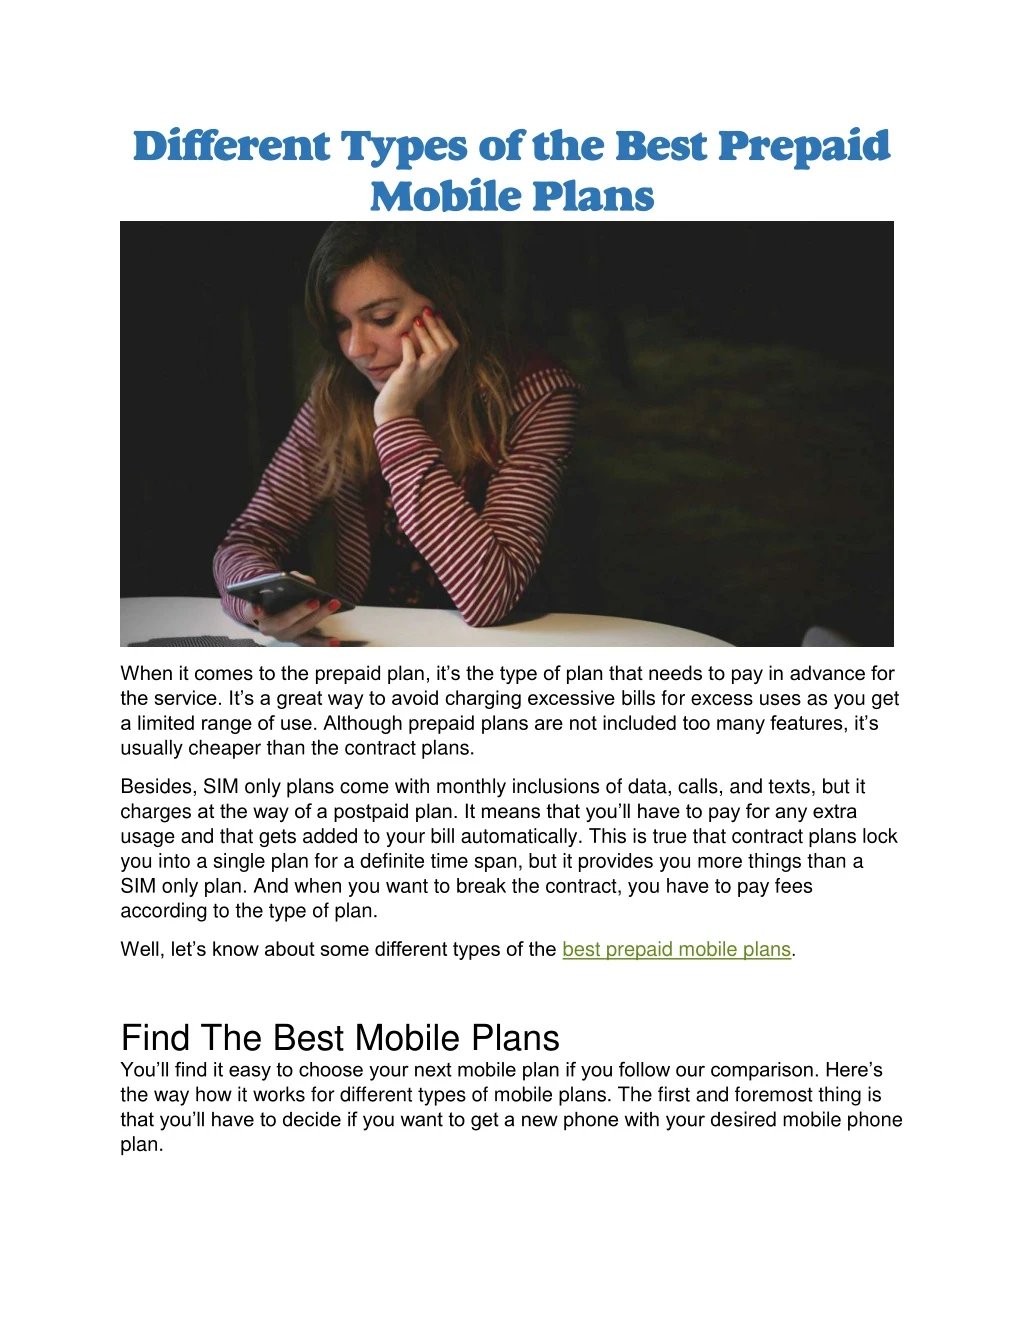 different types of the best prepaid mobile plans